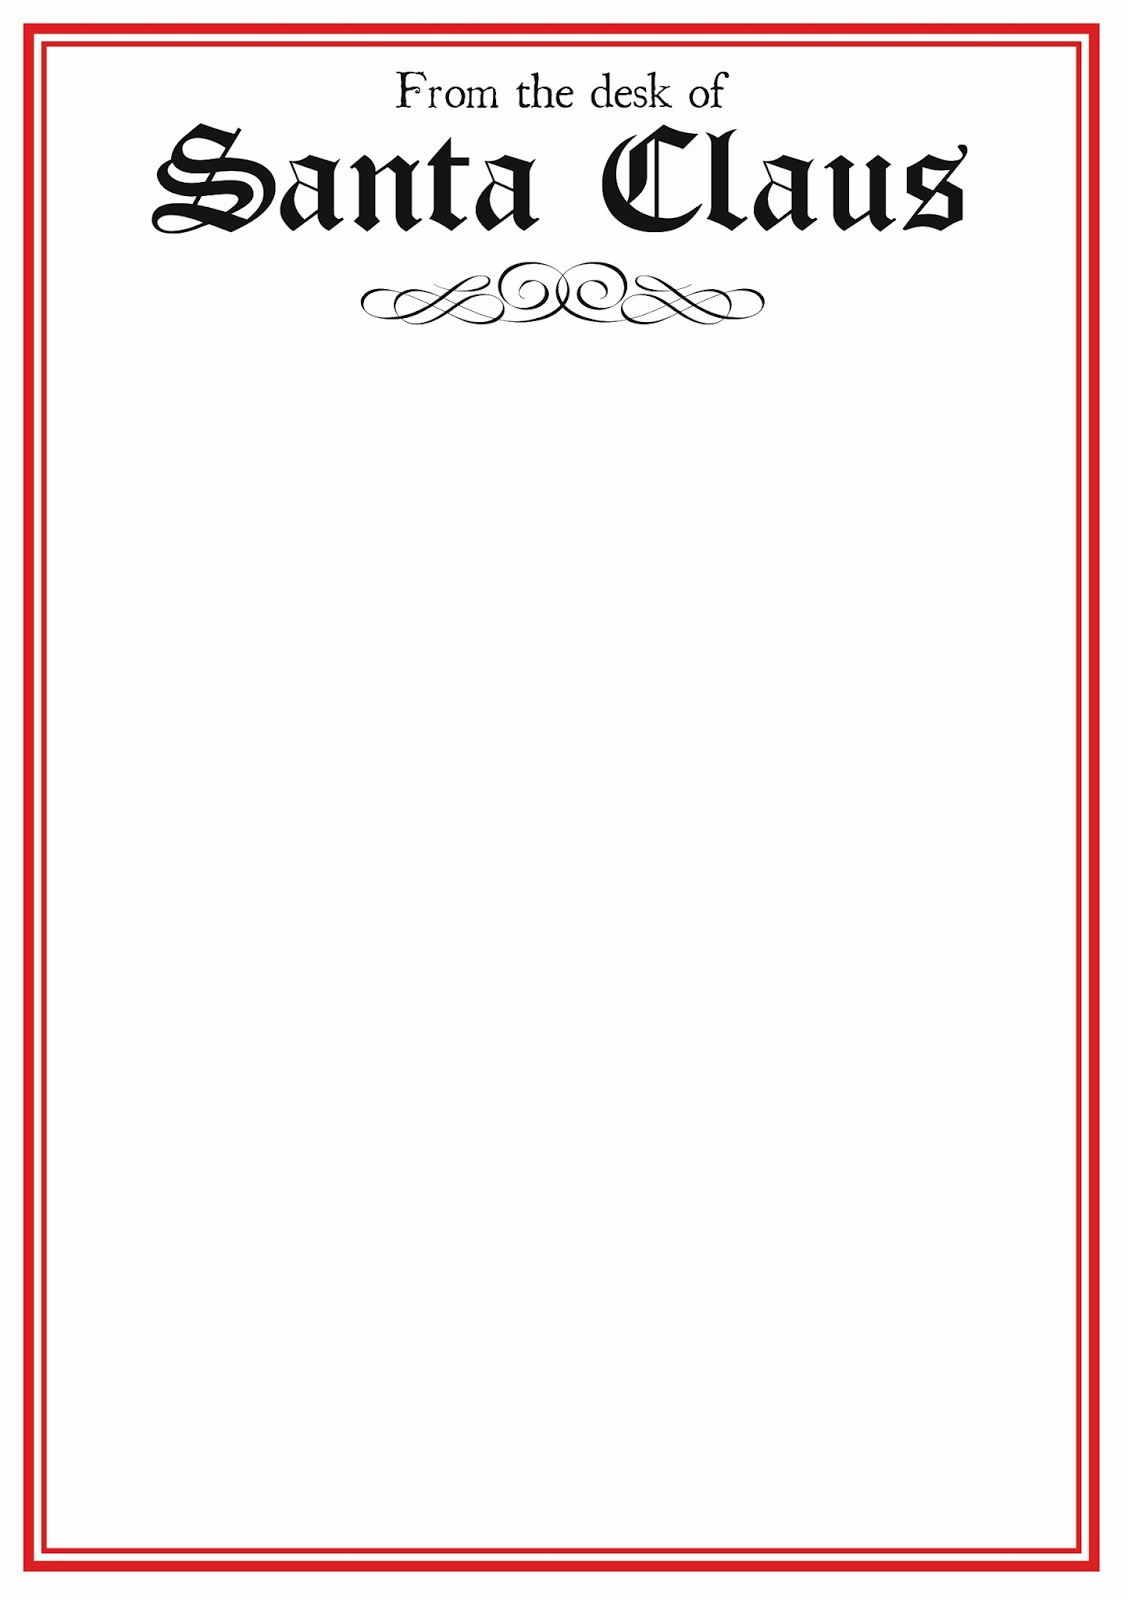 Free Printable Letter From Santa Word Template Samples | Letter - Free Printable Letter Templates